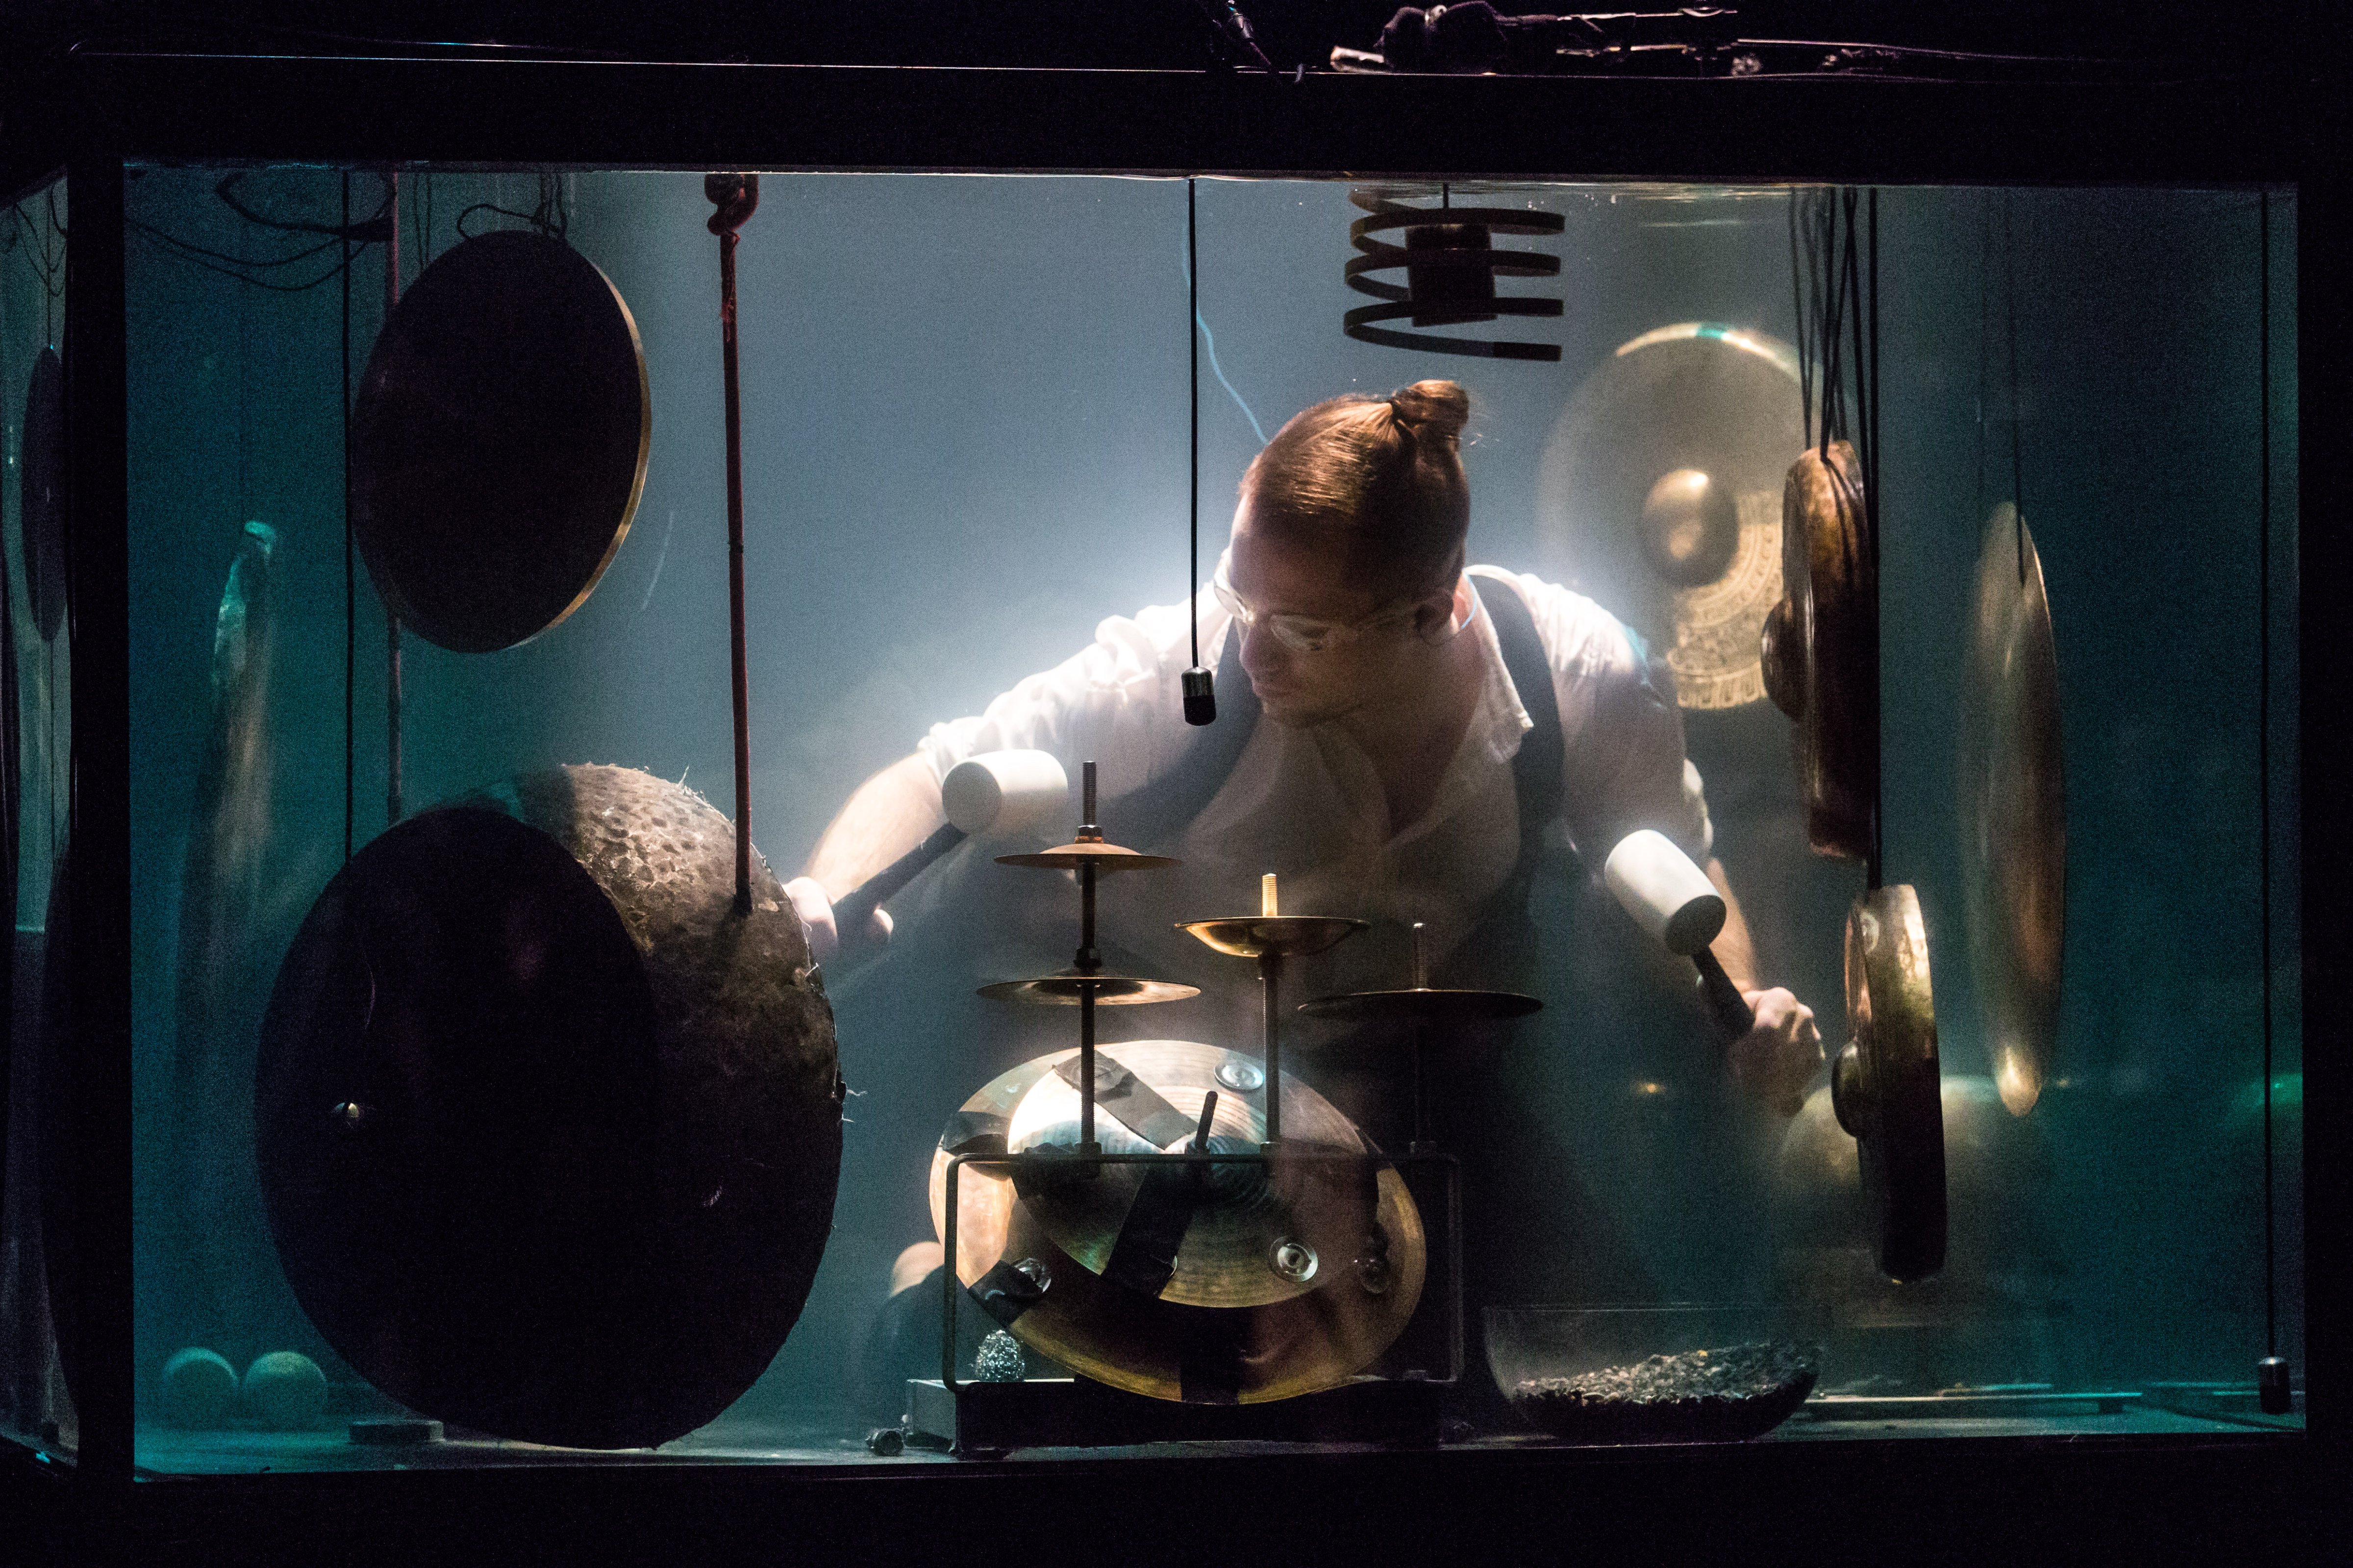 Drummer Morten Poulsen performs underwater ahead of a performance of AquaSonic at Hong Kong's New Vision Arts Festival, Oct. 25, 2018. (Aria Chen—TIME)